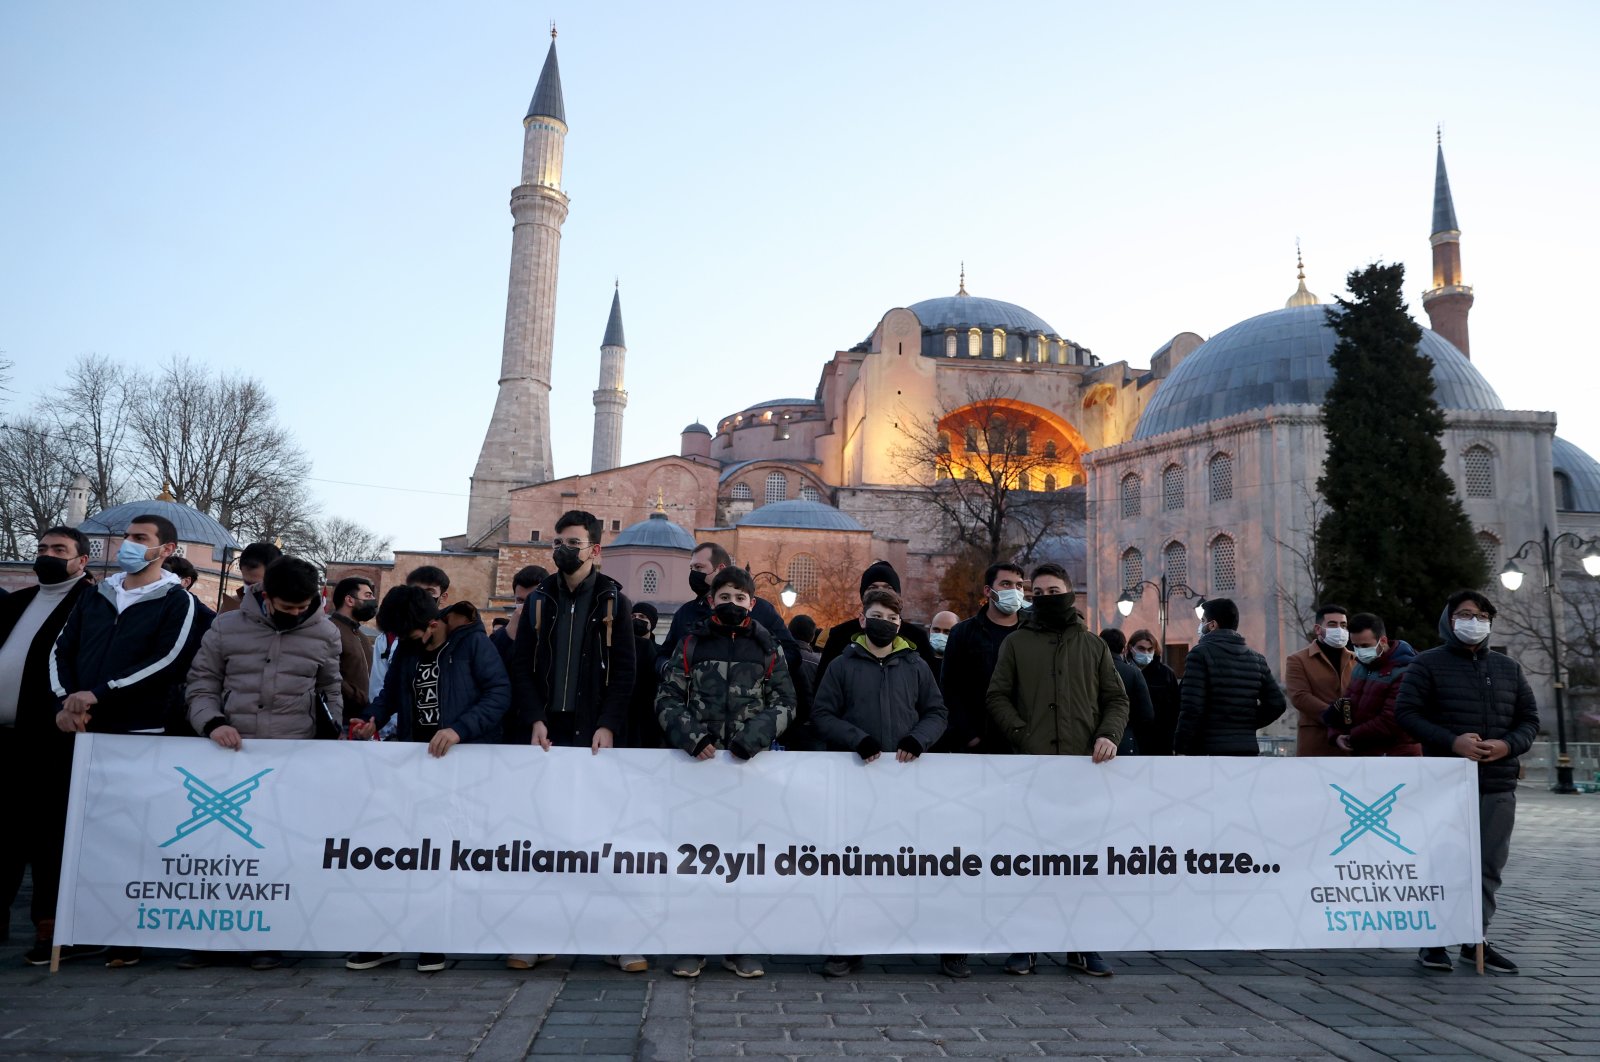 People hold a banner during an event commemorating Khojaly Massacre victims near the Hagia Sophia Grand Mosque in Istanbul, Turkey, Feb. 26, 2021. (AA Photo)